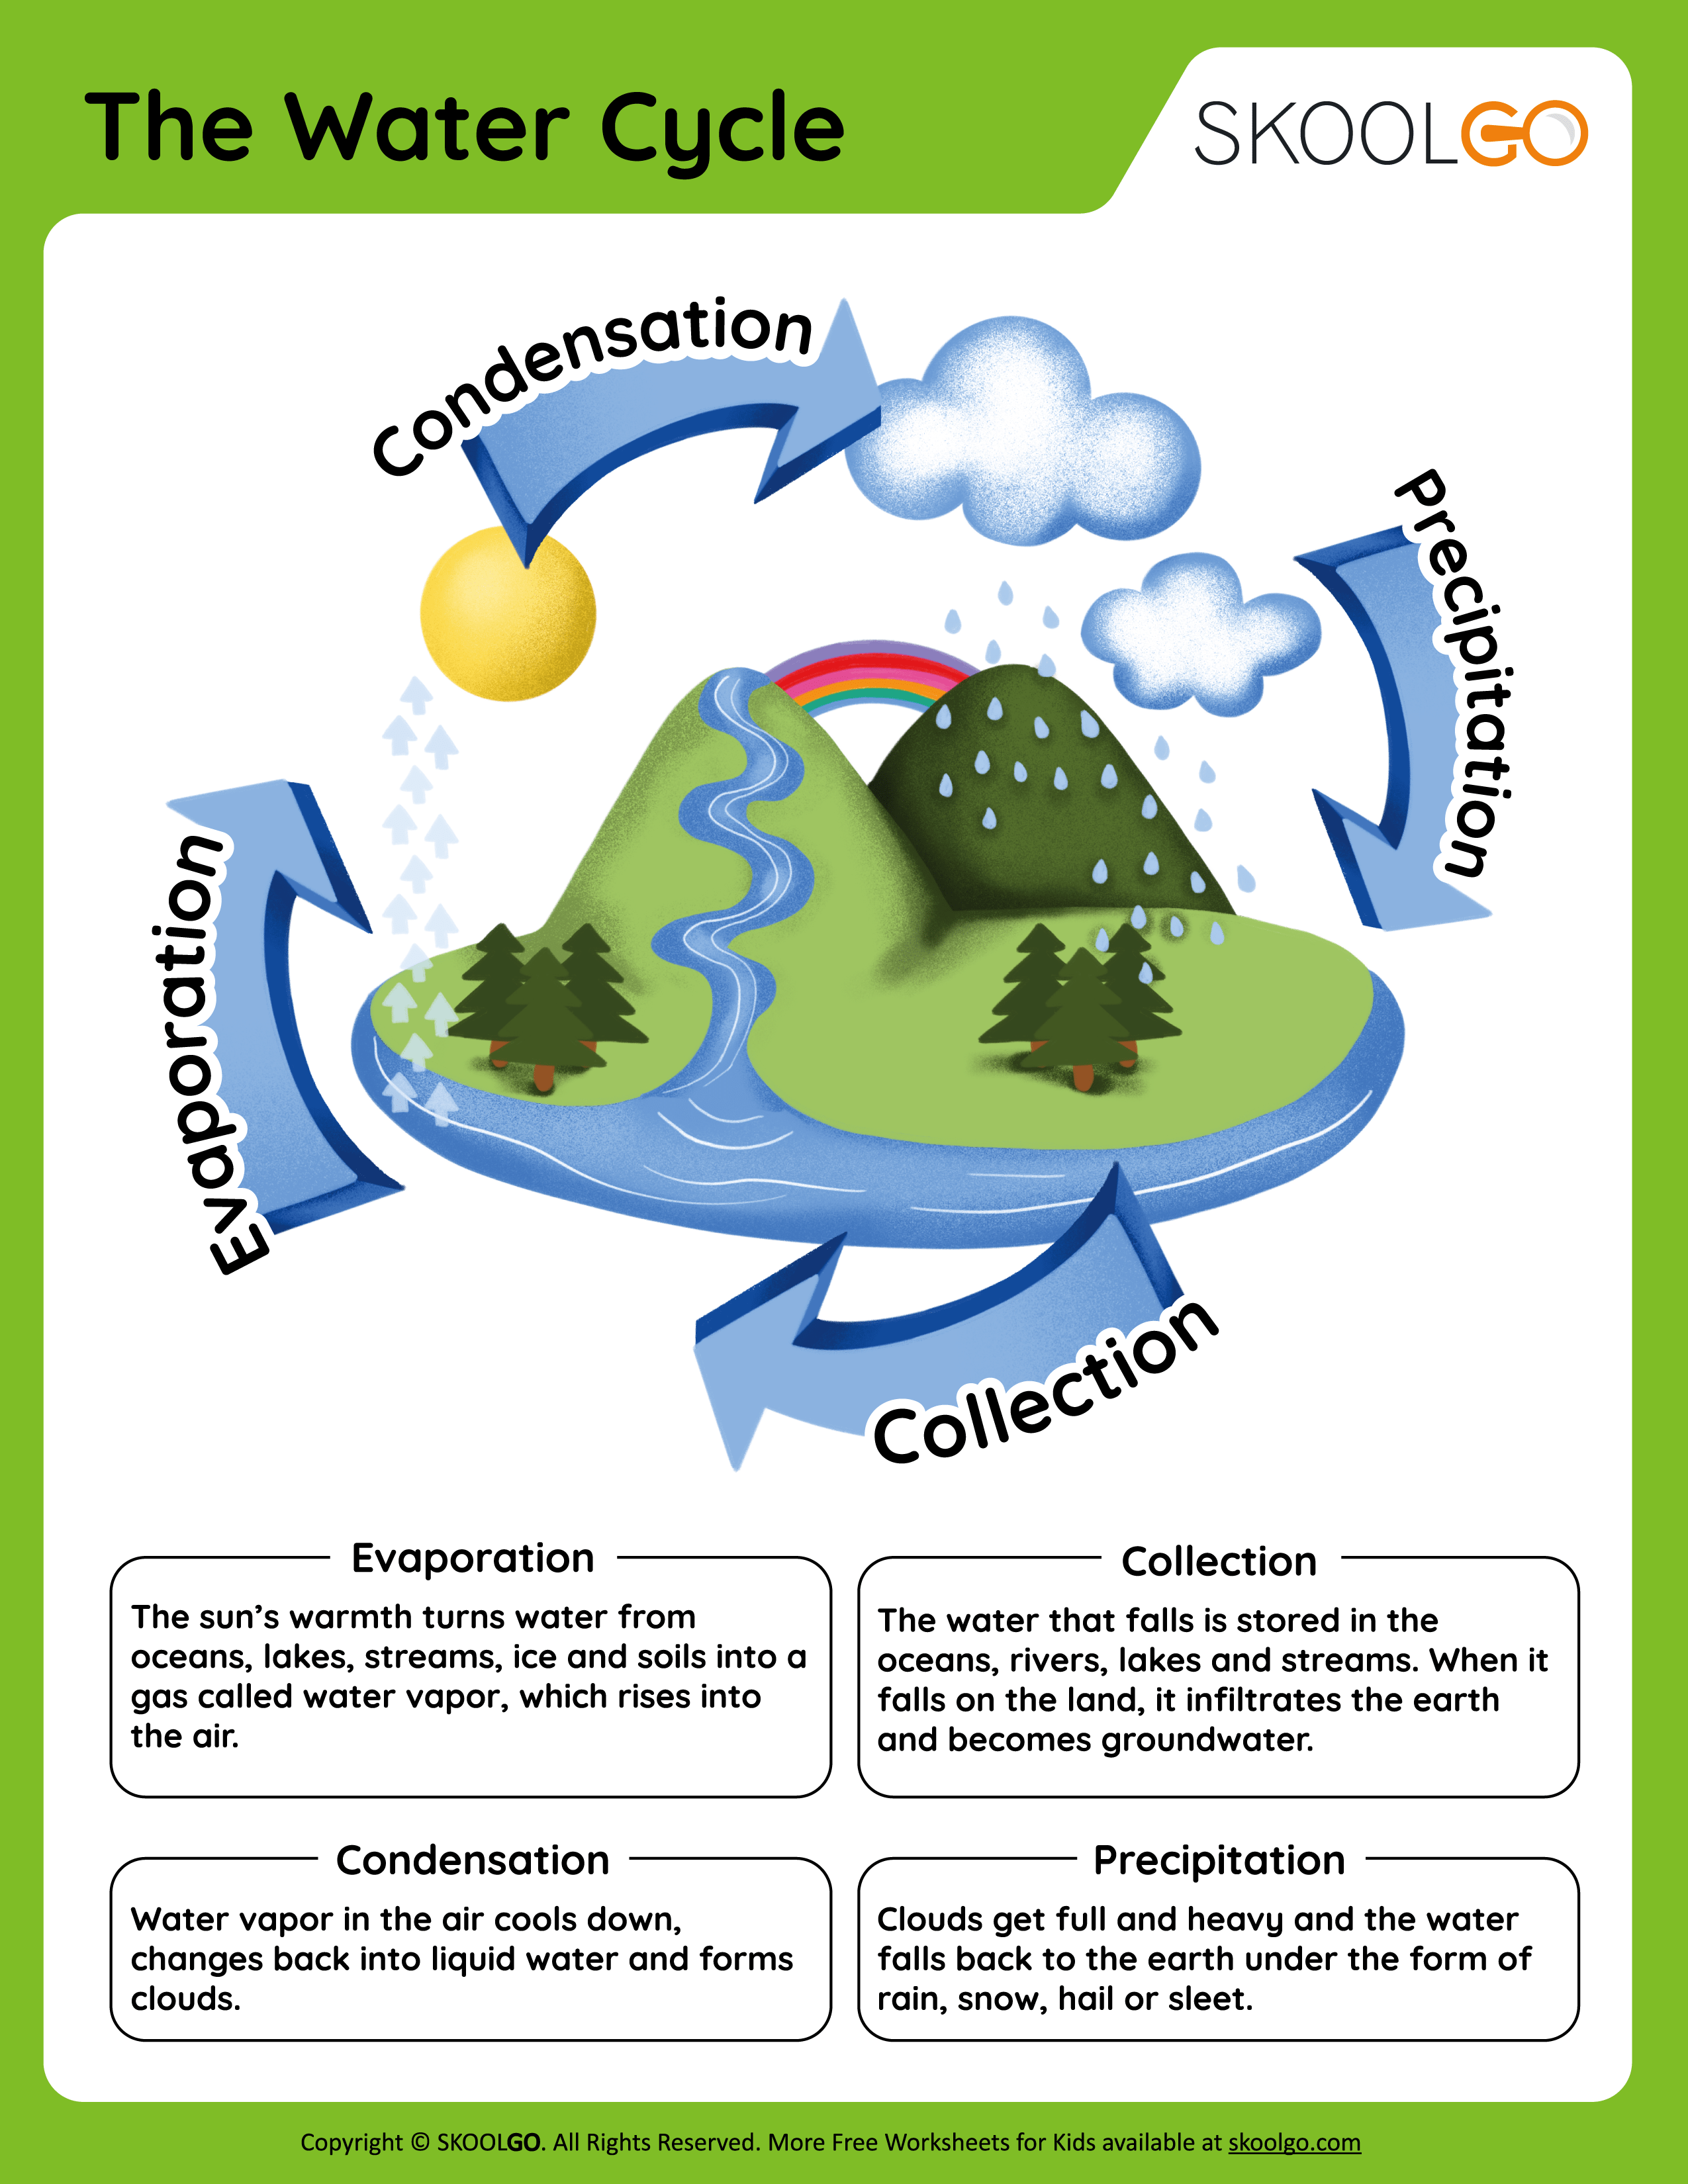 The Water Cycle - Free Worksheet for Kids